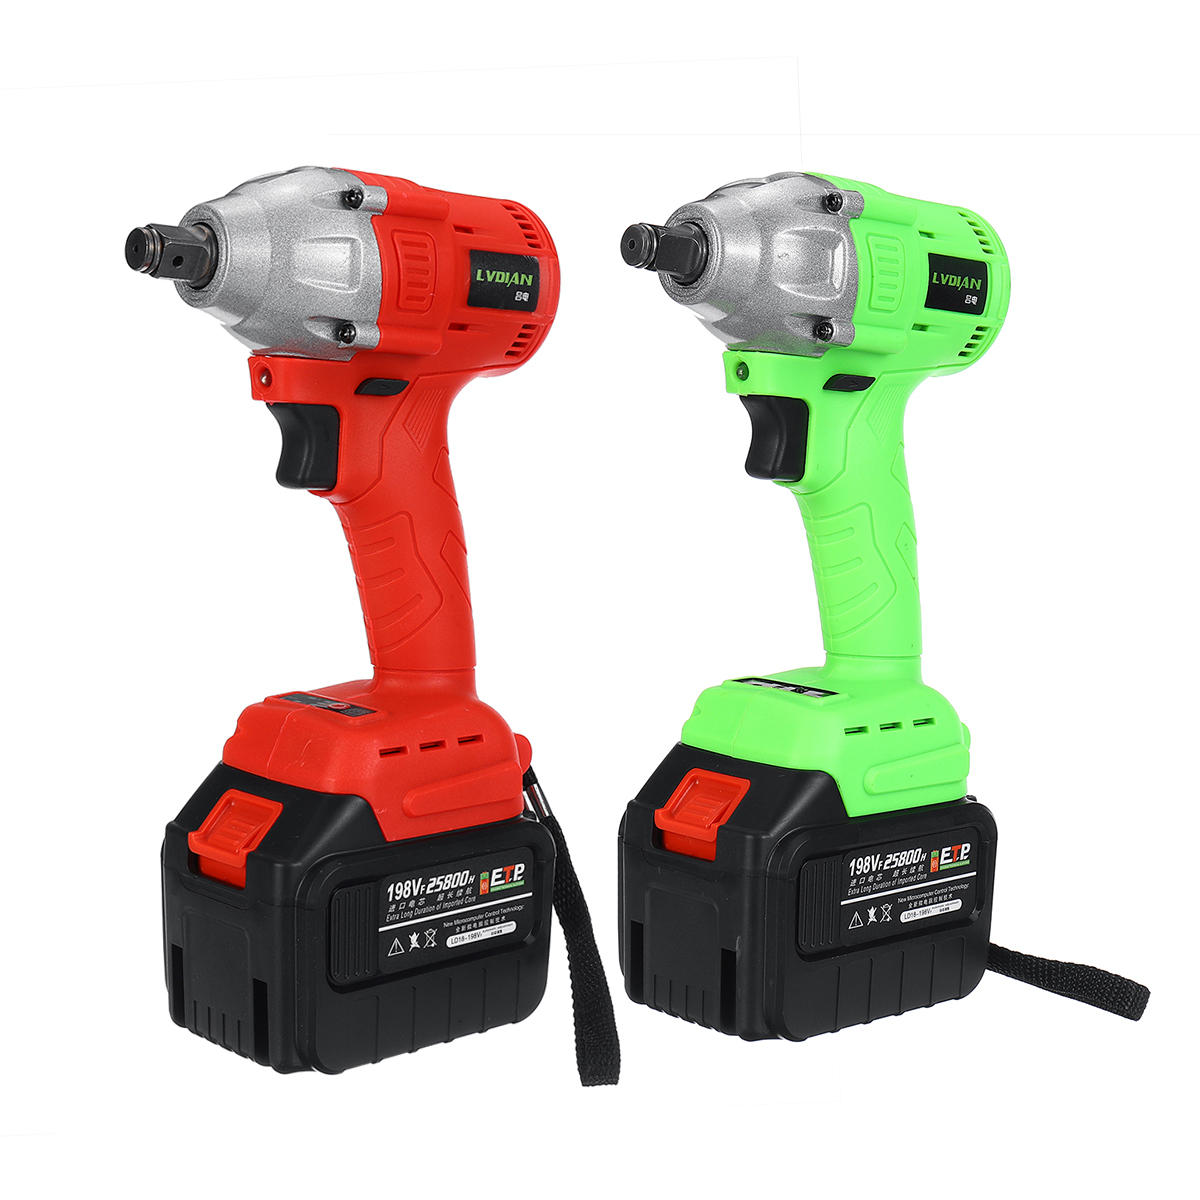 128VF/198VF 350Nm Brushless Electric Cordless Impact Wrench Drill Driver Kit